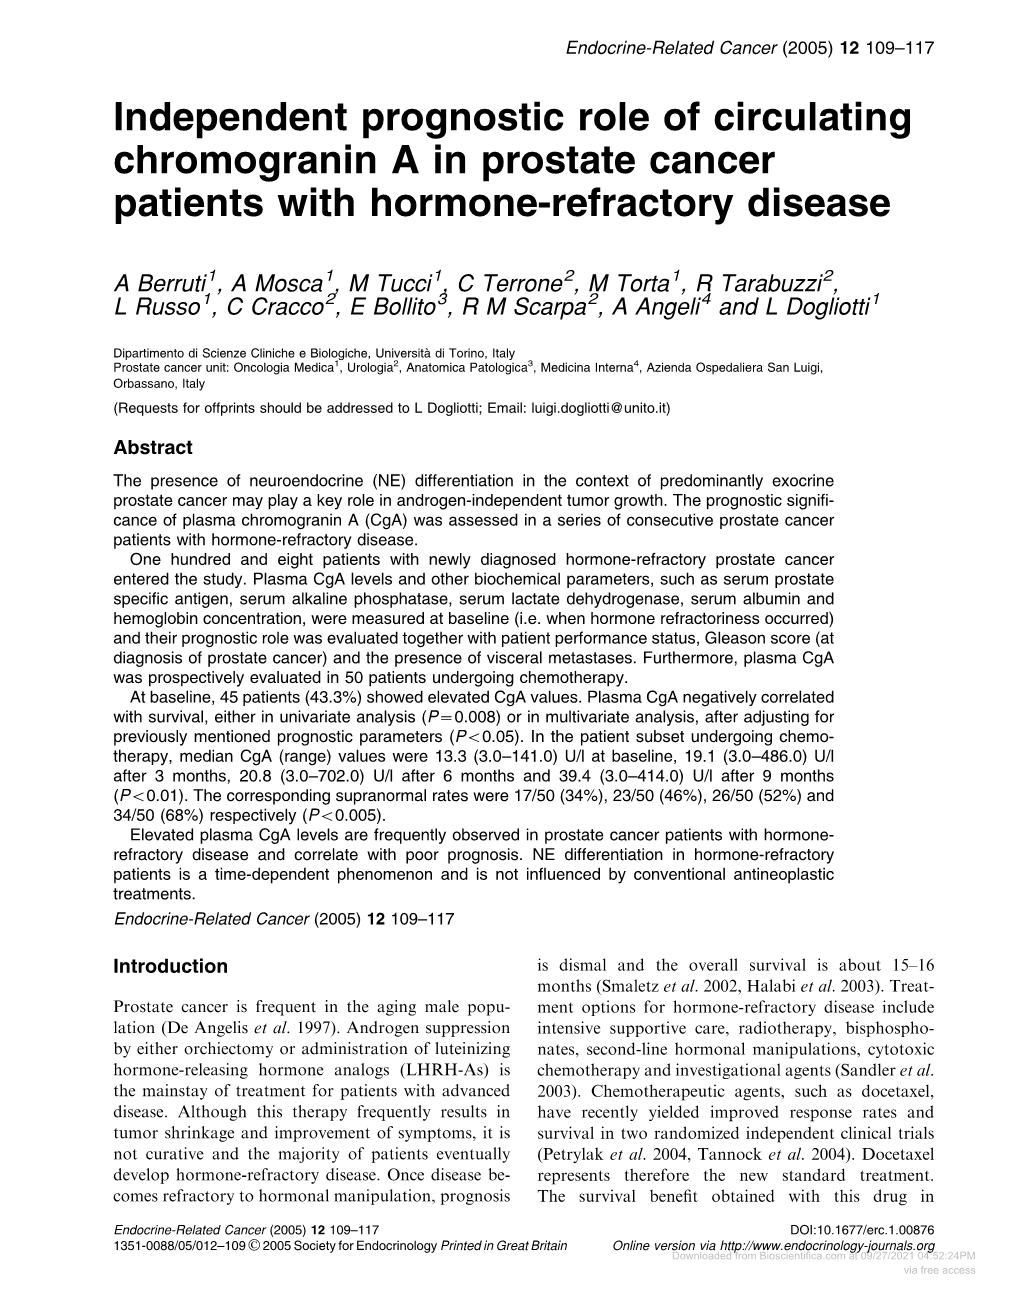 Independent Prognostic Role of Circulating Chromogranin a in Prostate Cancer Patients with Hormone-Refractory Disease